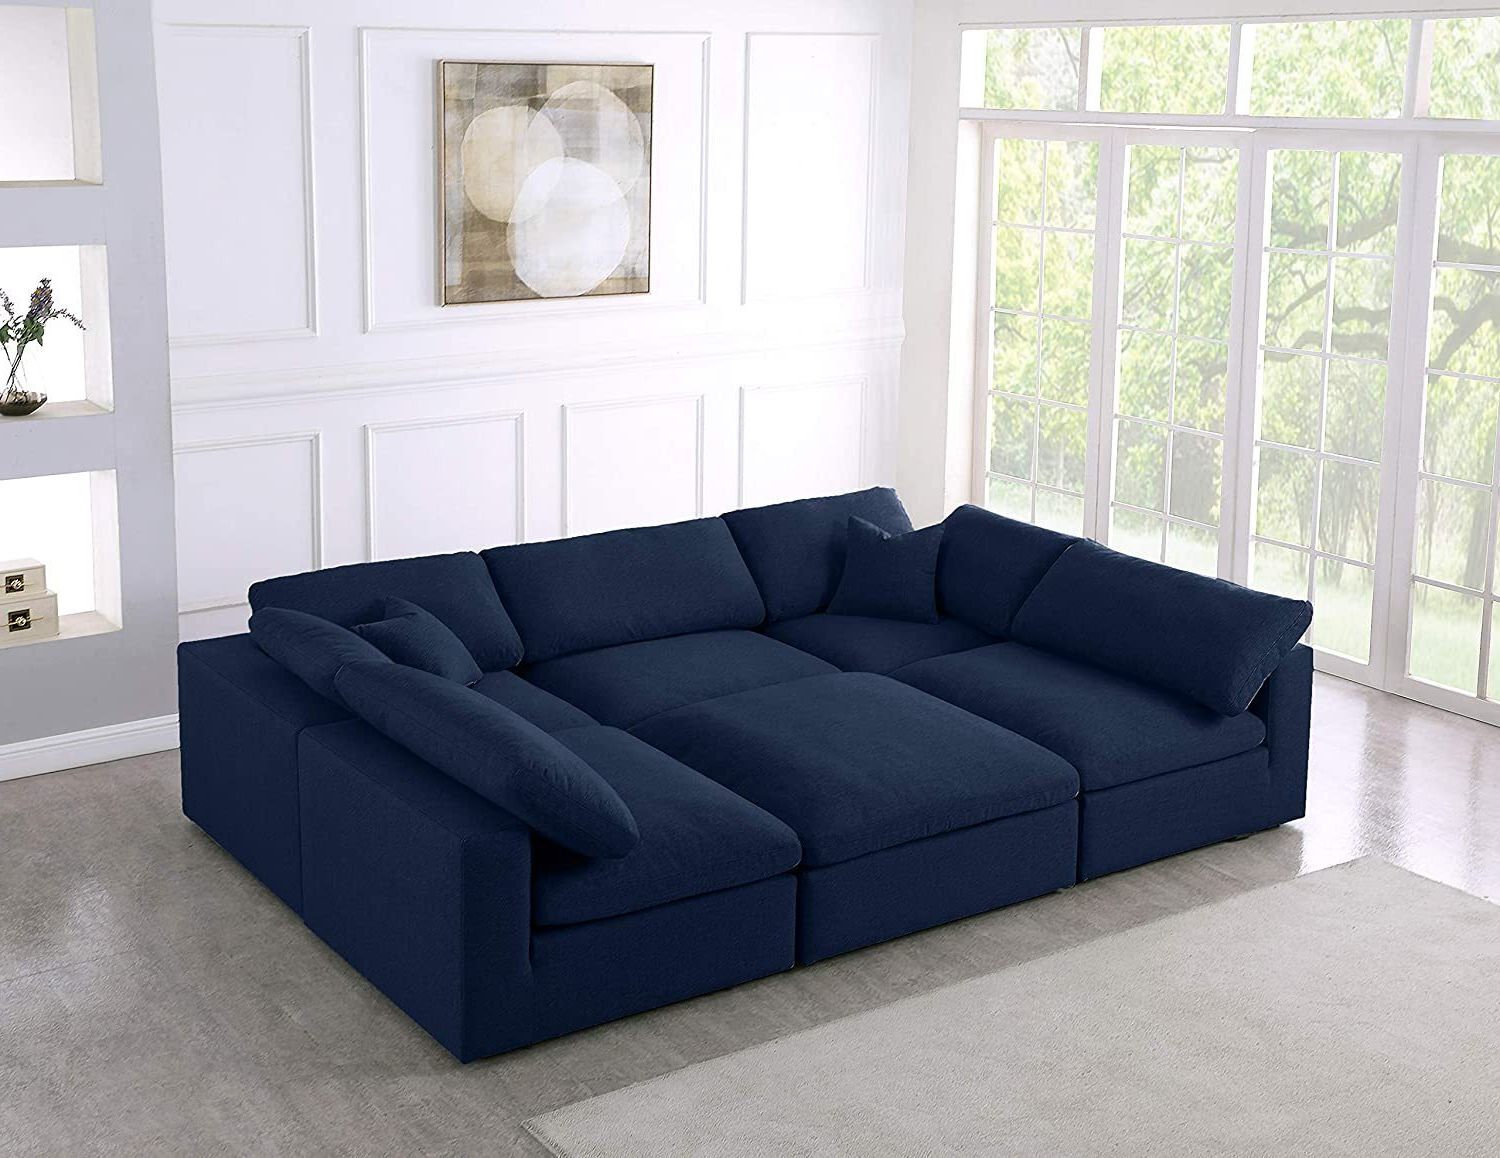 Modular Sleeper Sofas – Ideas On Foter Intended For Oversized Sleeper Sofa Couch Beds (Gallery 2 of 20)